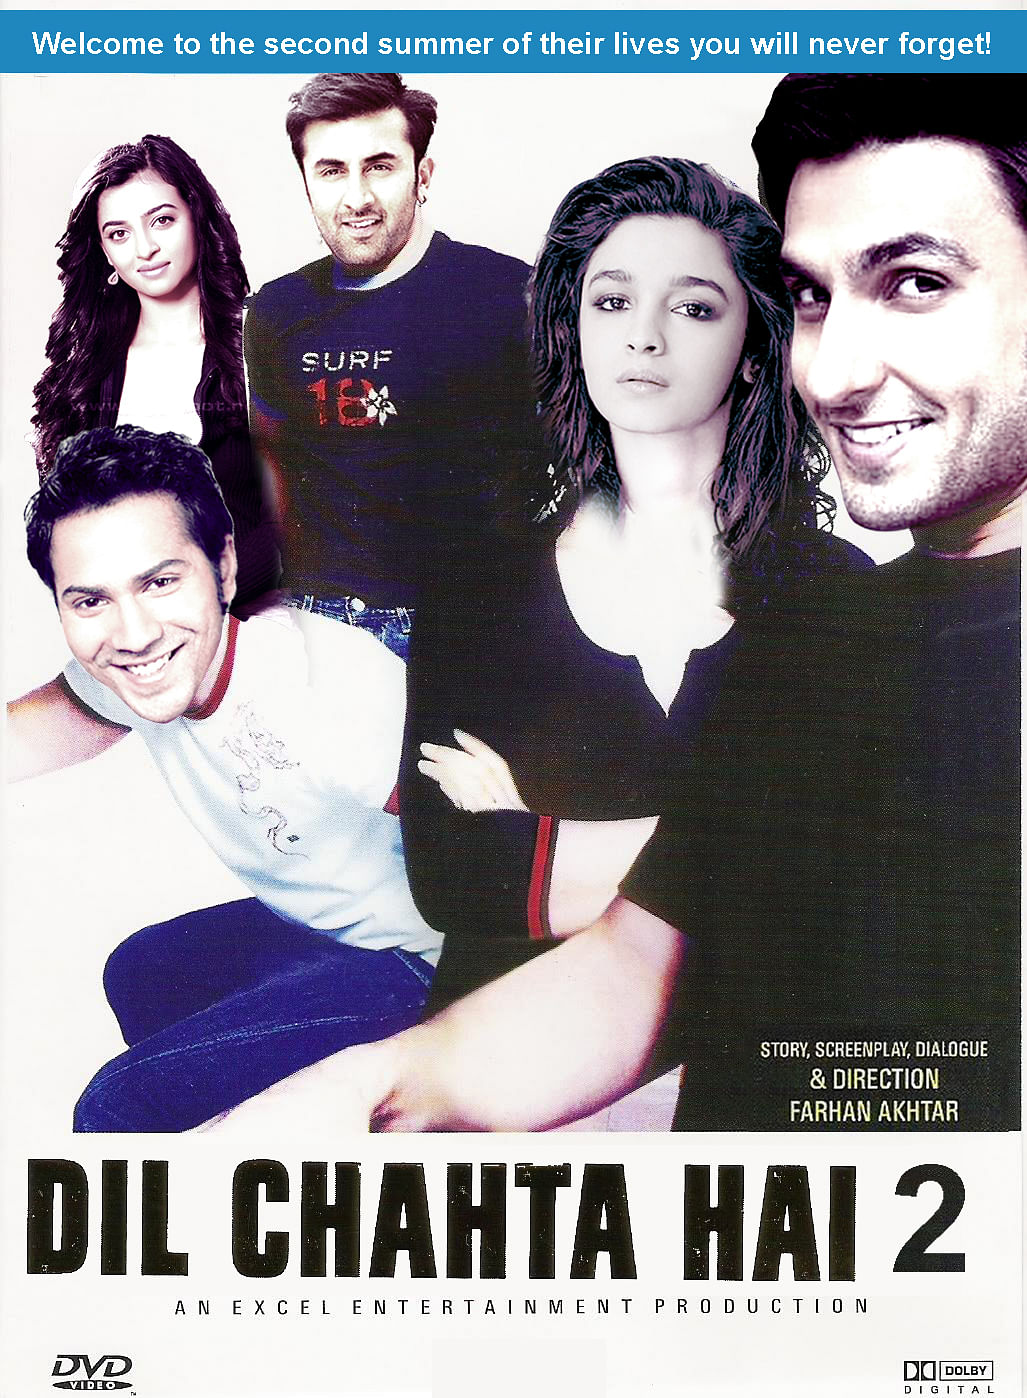 

Upon hearing rumours of ‘Dil Chahta Hai 2’ in the offing, we decided to cast for the remake of the iconic film.